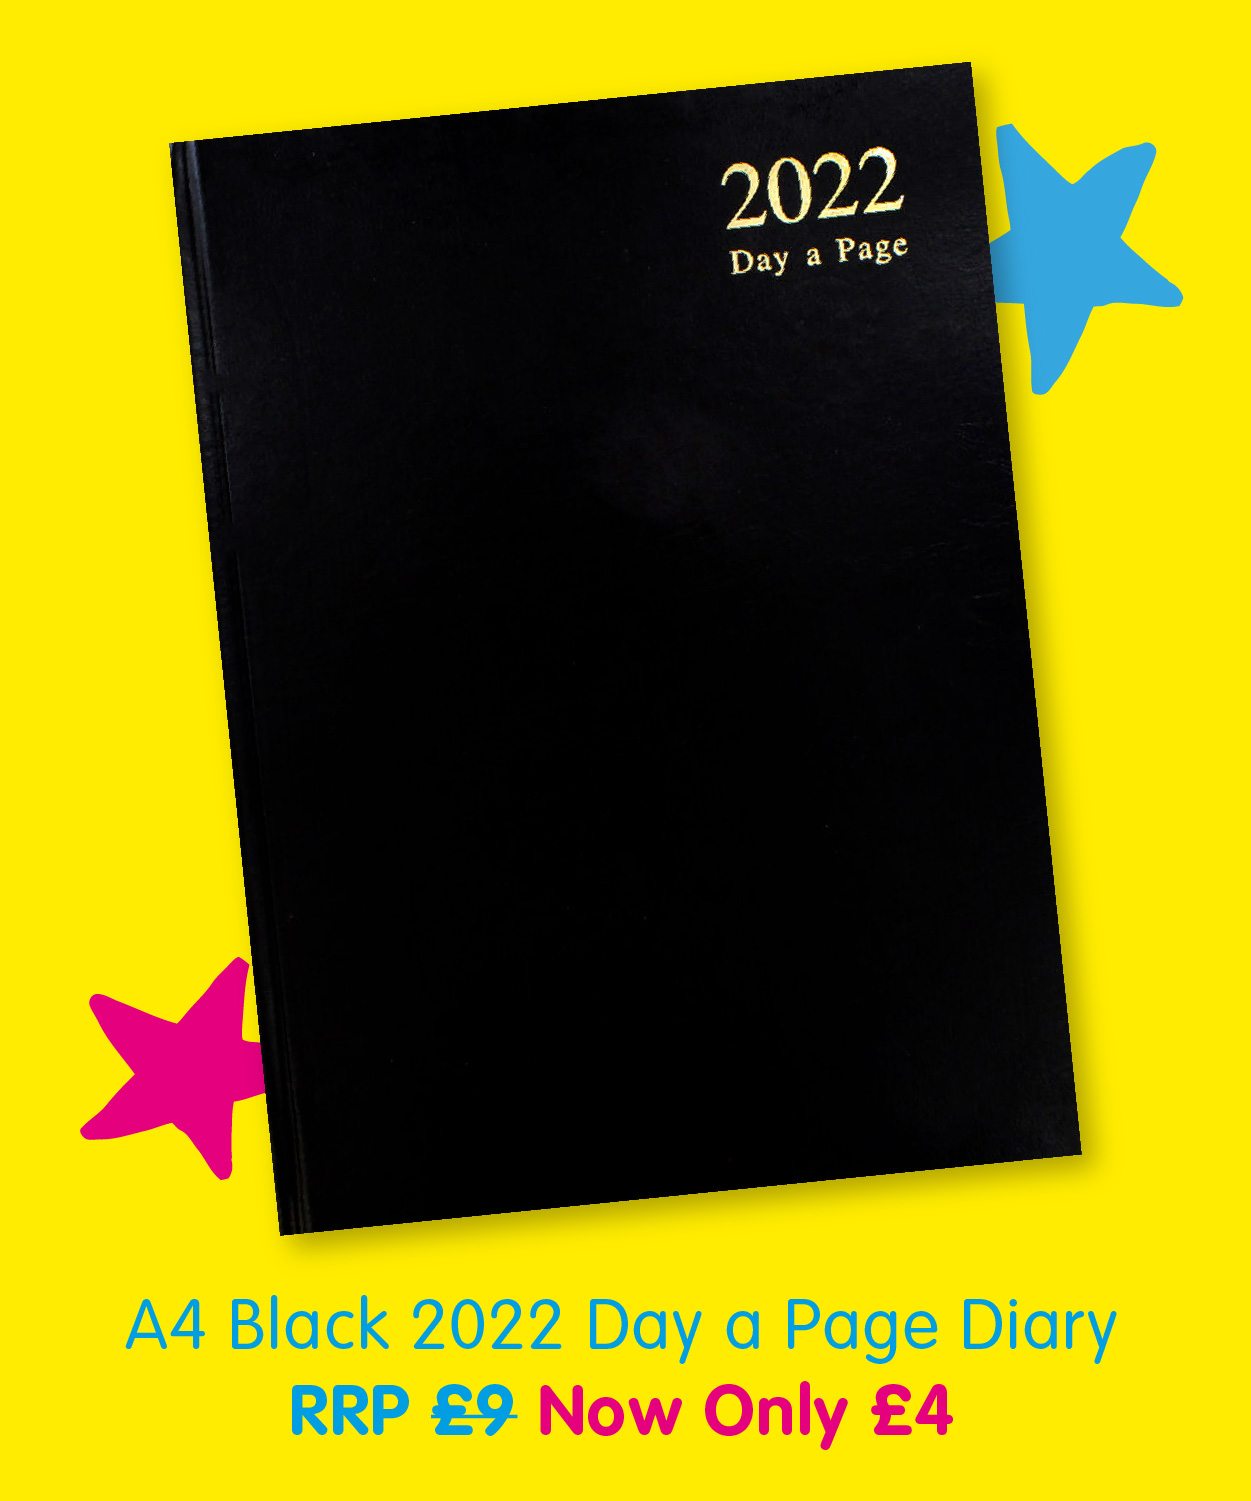 A4 Black 2022 Day a Page Diary